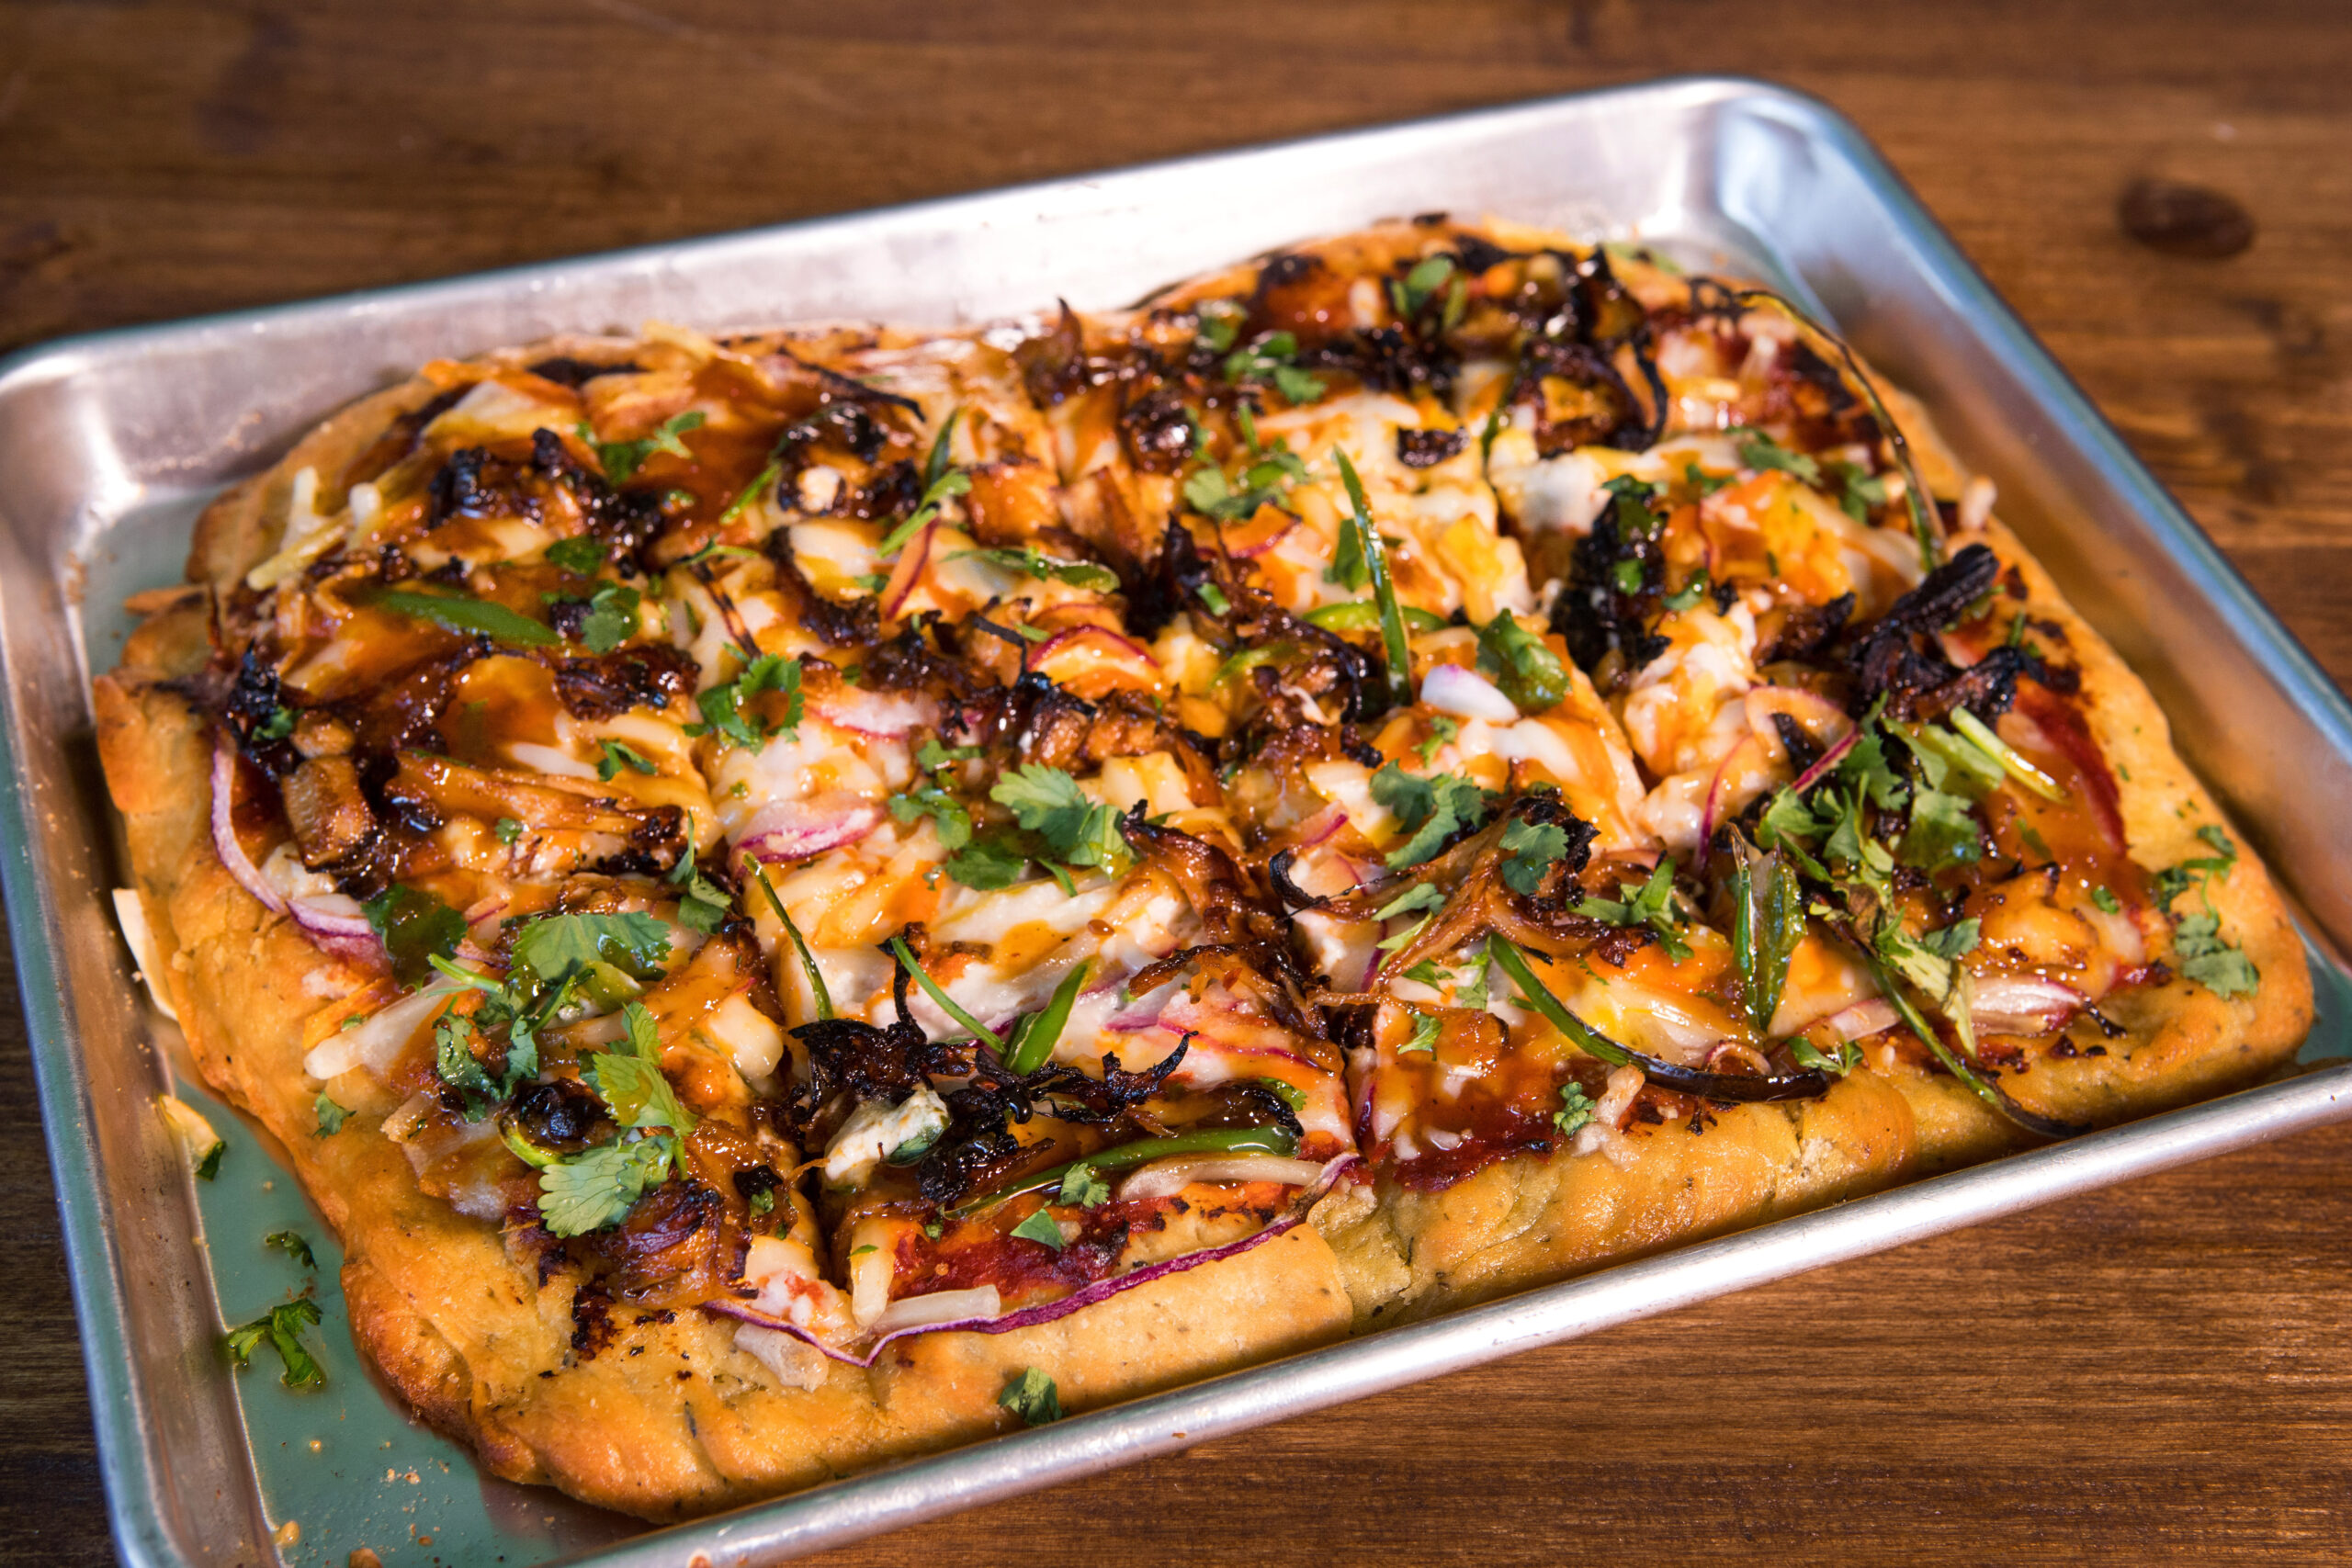 A vegan sheet pan pizza called "Korean BBQ Pulled Shrooms" has shredded trumpet mushrooms, slow cooked Korean barbecue sauce, red onion and chilies, at Magdelena's Savories & Sweets, in Petaluma, Calif., on Saturday, February 19, 2022. (Photo by Darryl Bush / For The Press Democrat)